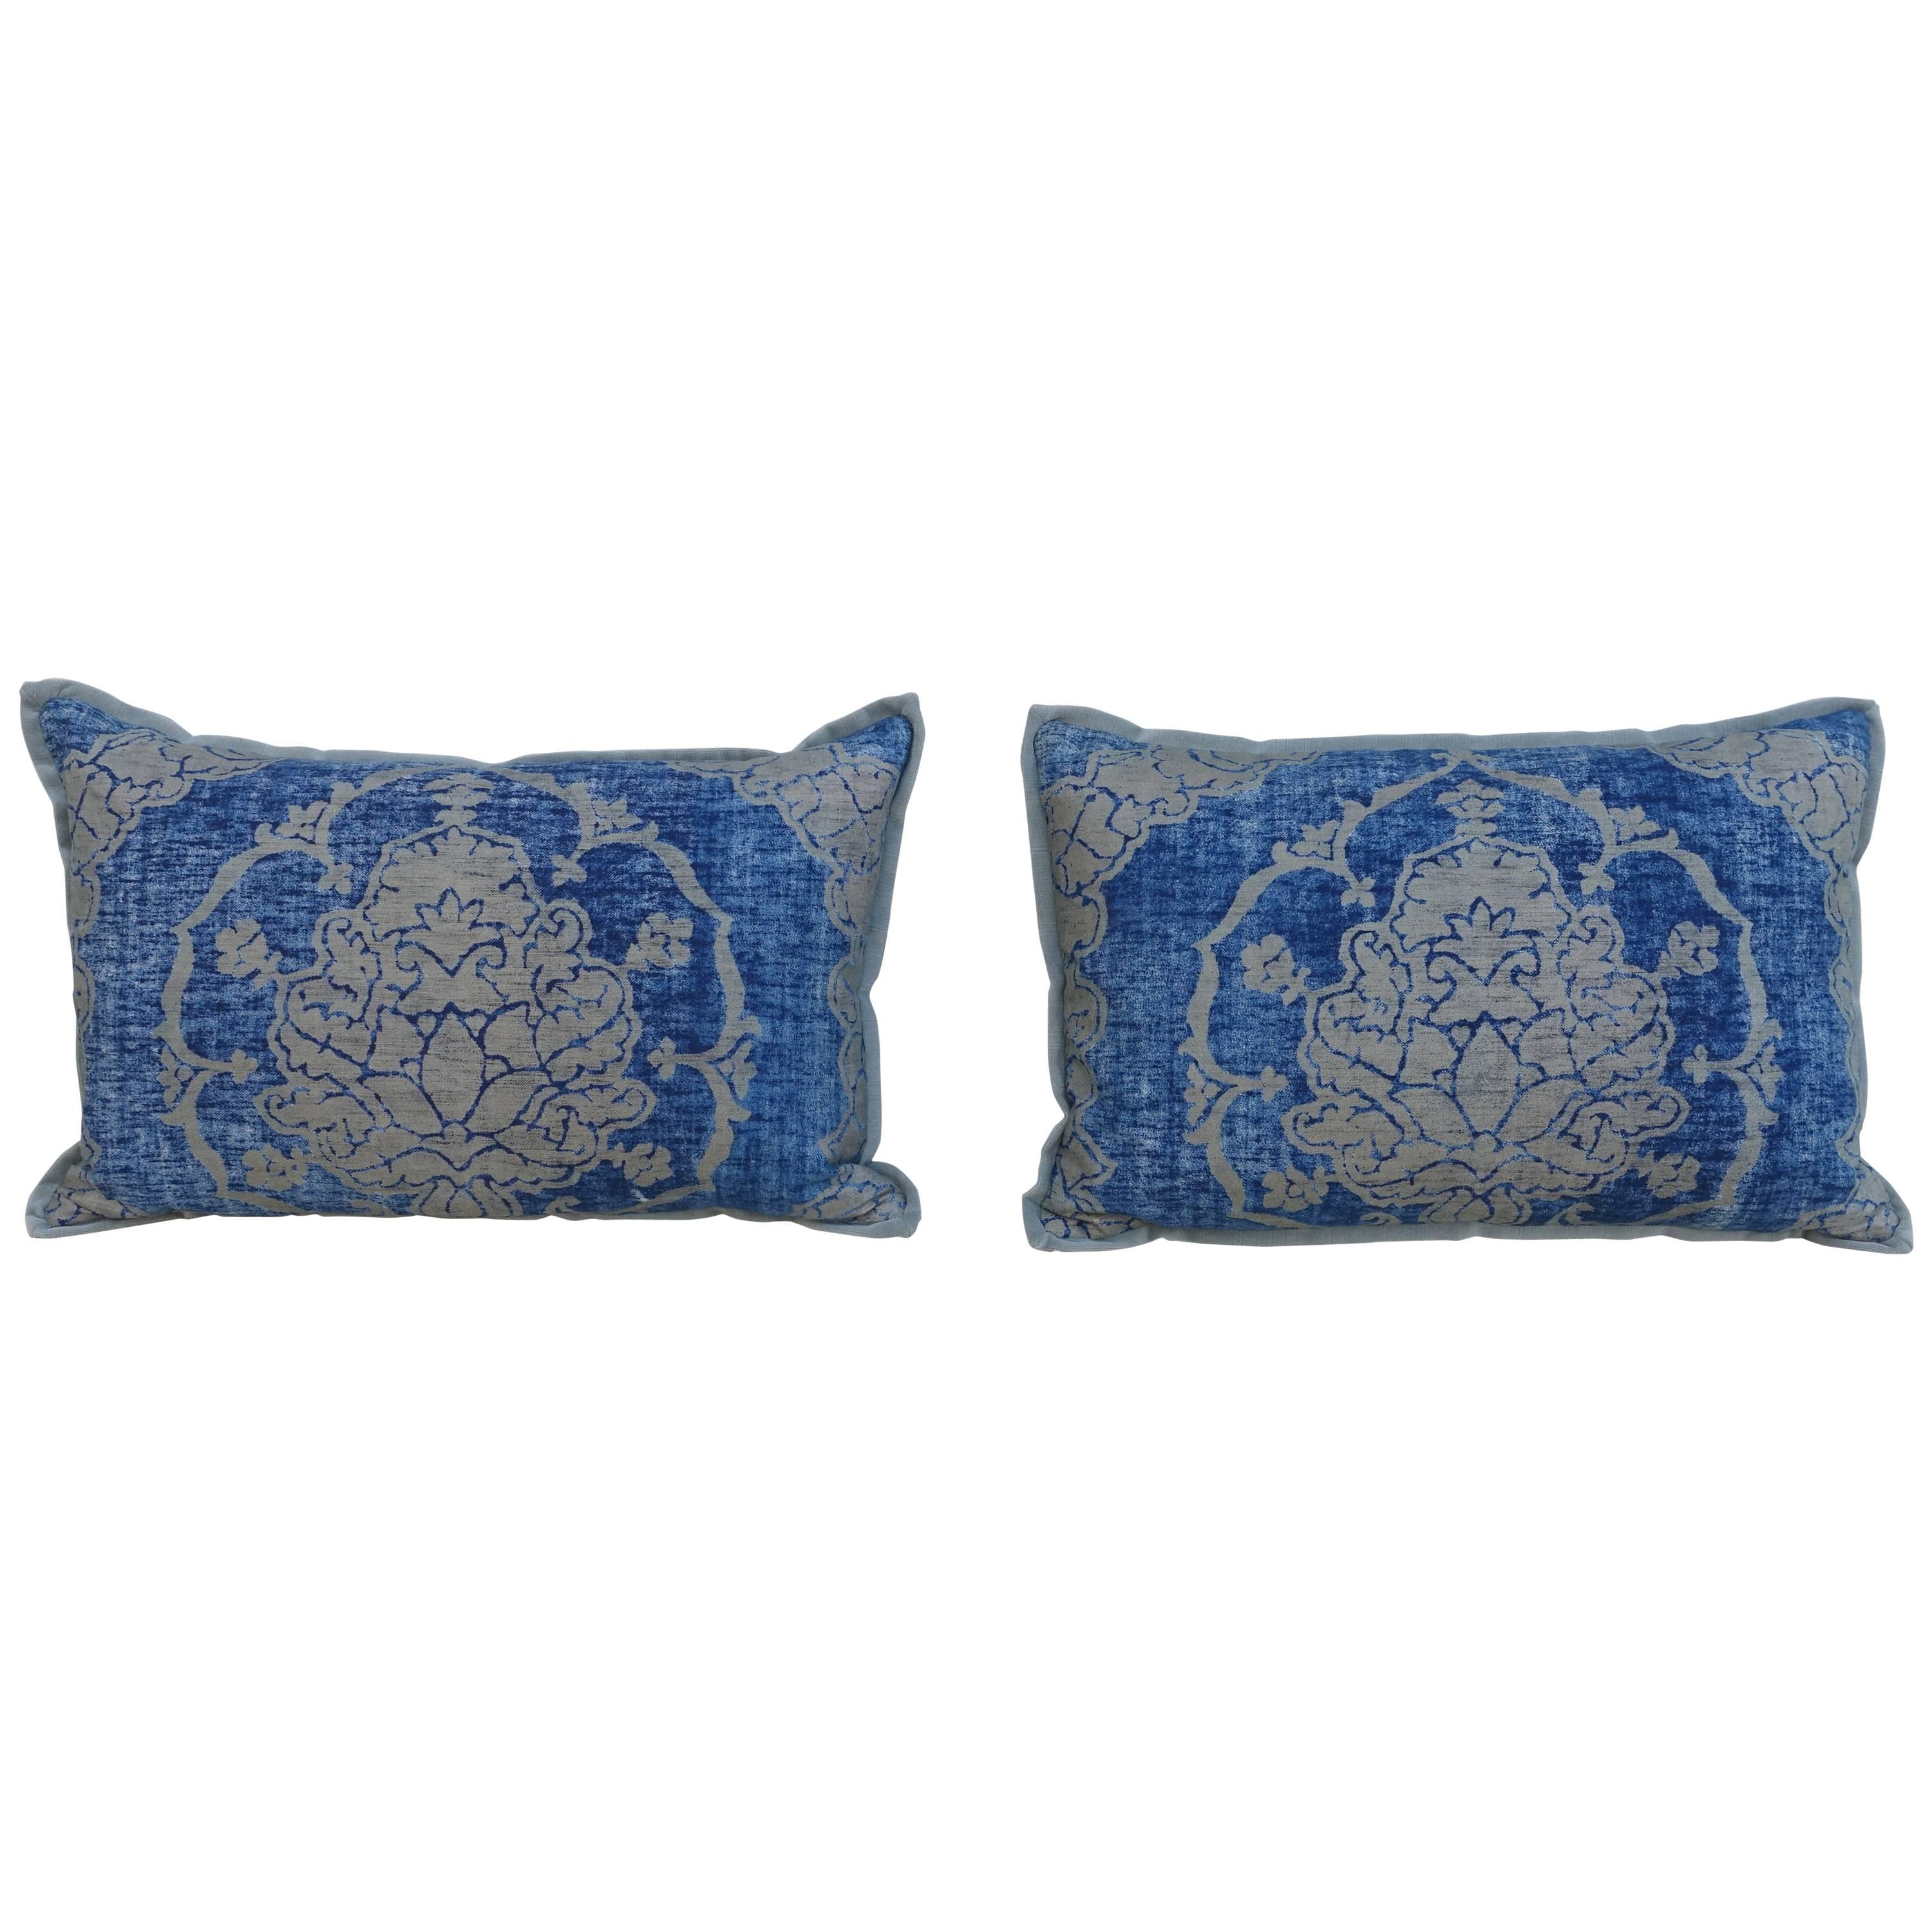 Pair of Blue and Grey Fortuny Textile Pillows